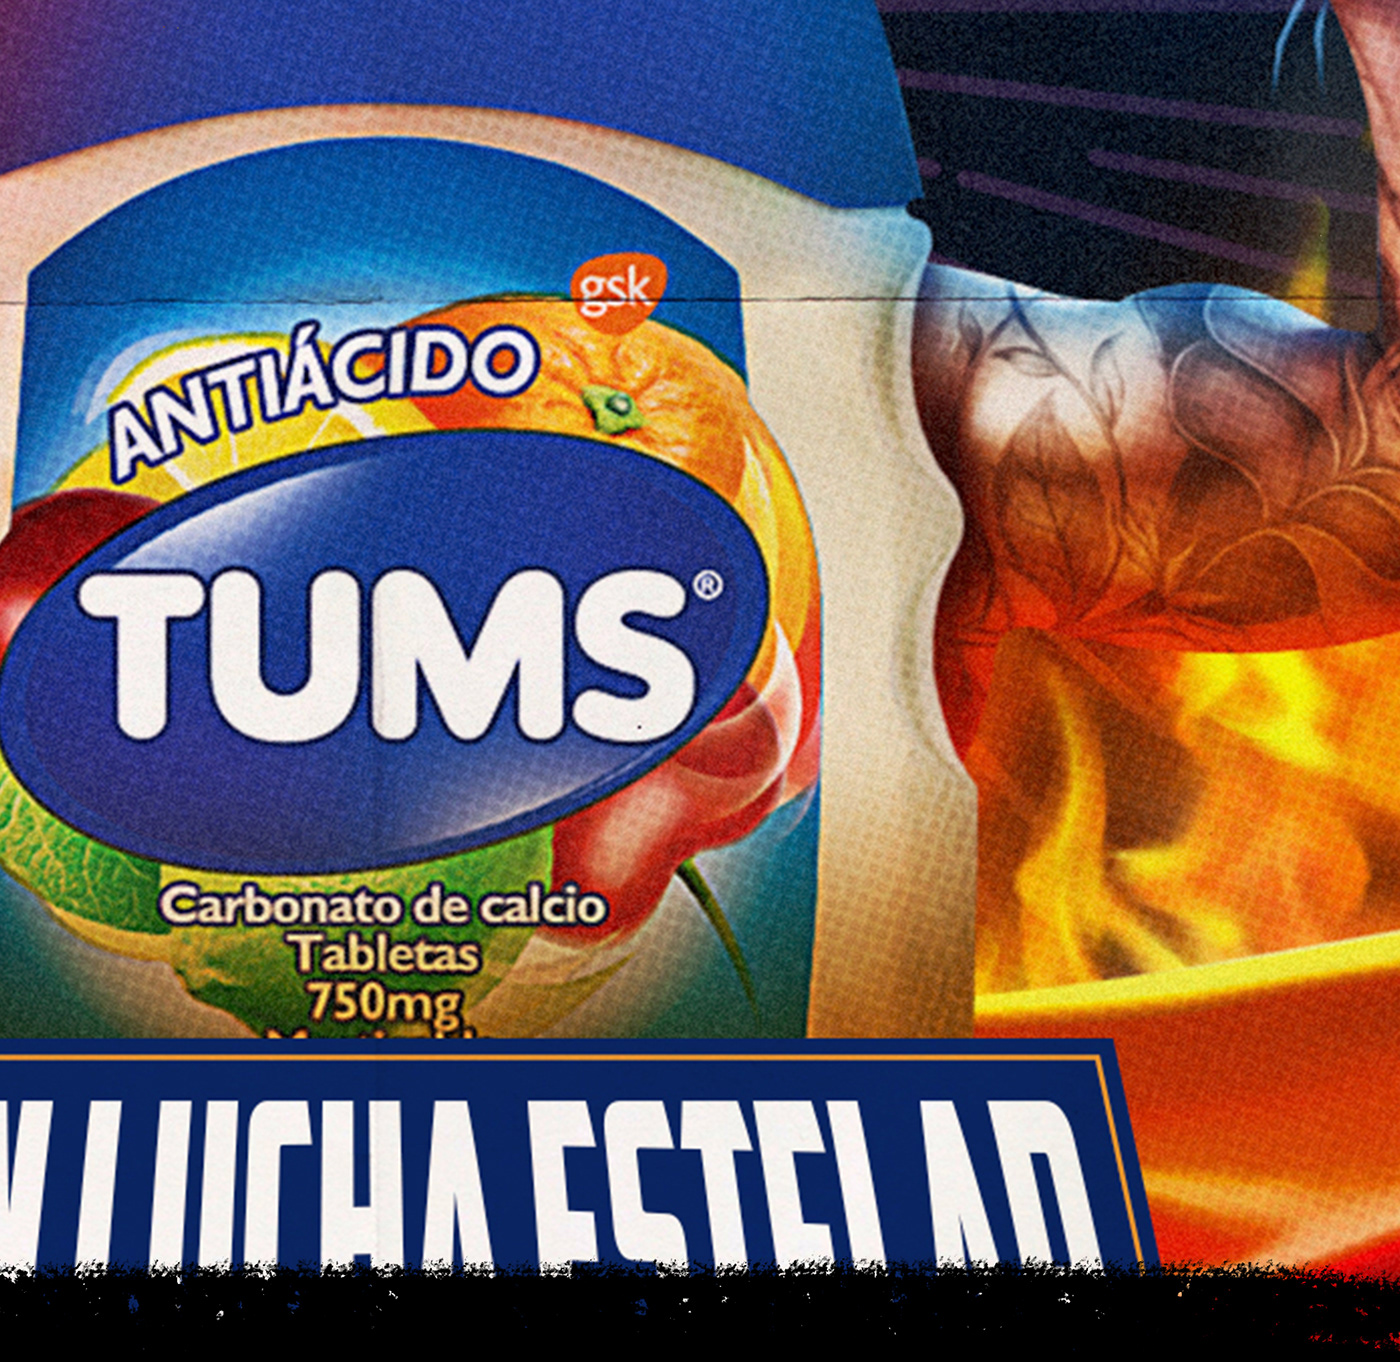 lucha lucha libre TUMS ad advertisement digital painting design mexico Mex luchadores